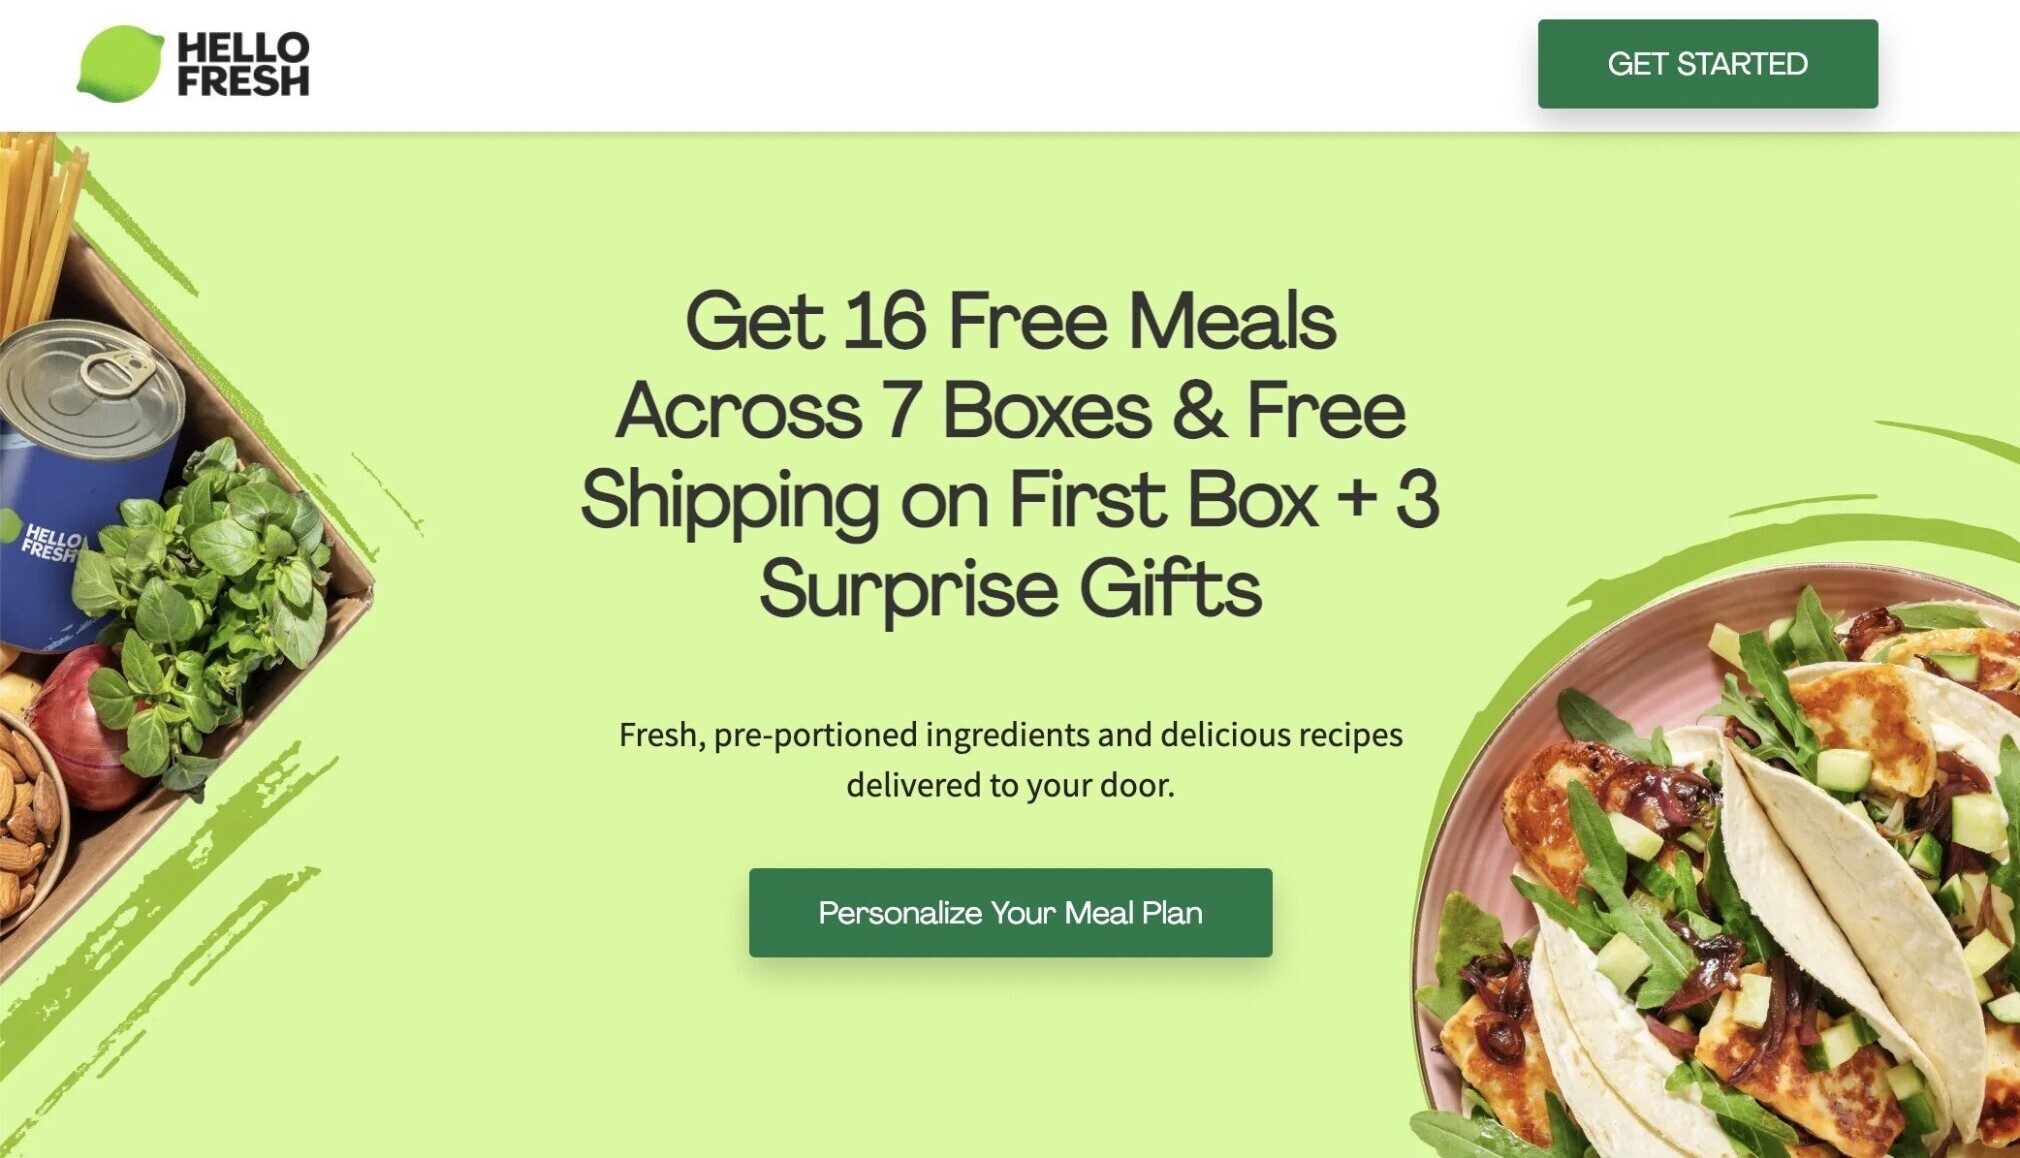 Hello Fresh's landing page with a taco dish and a box of ingredients